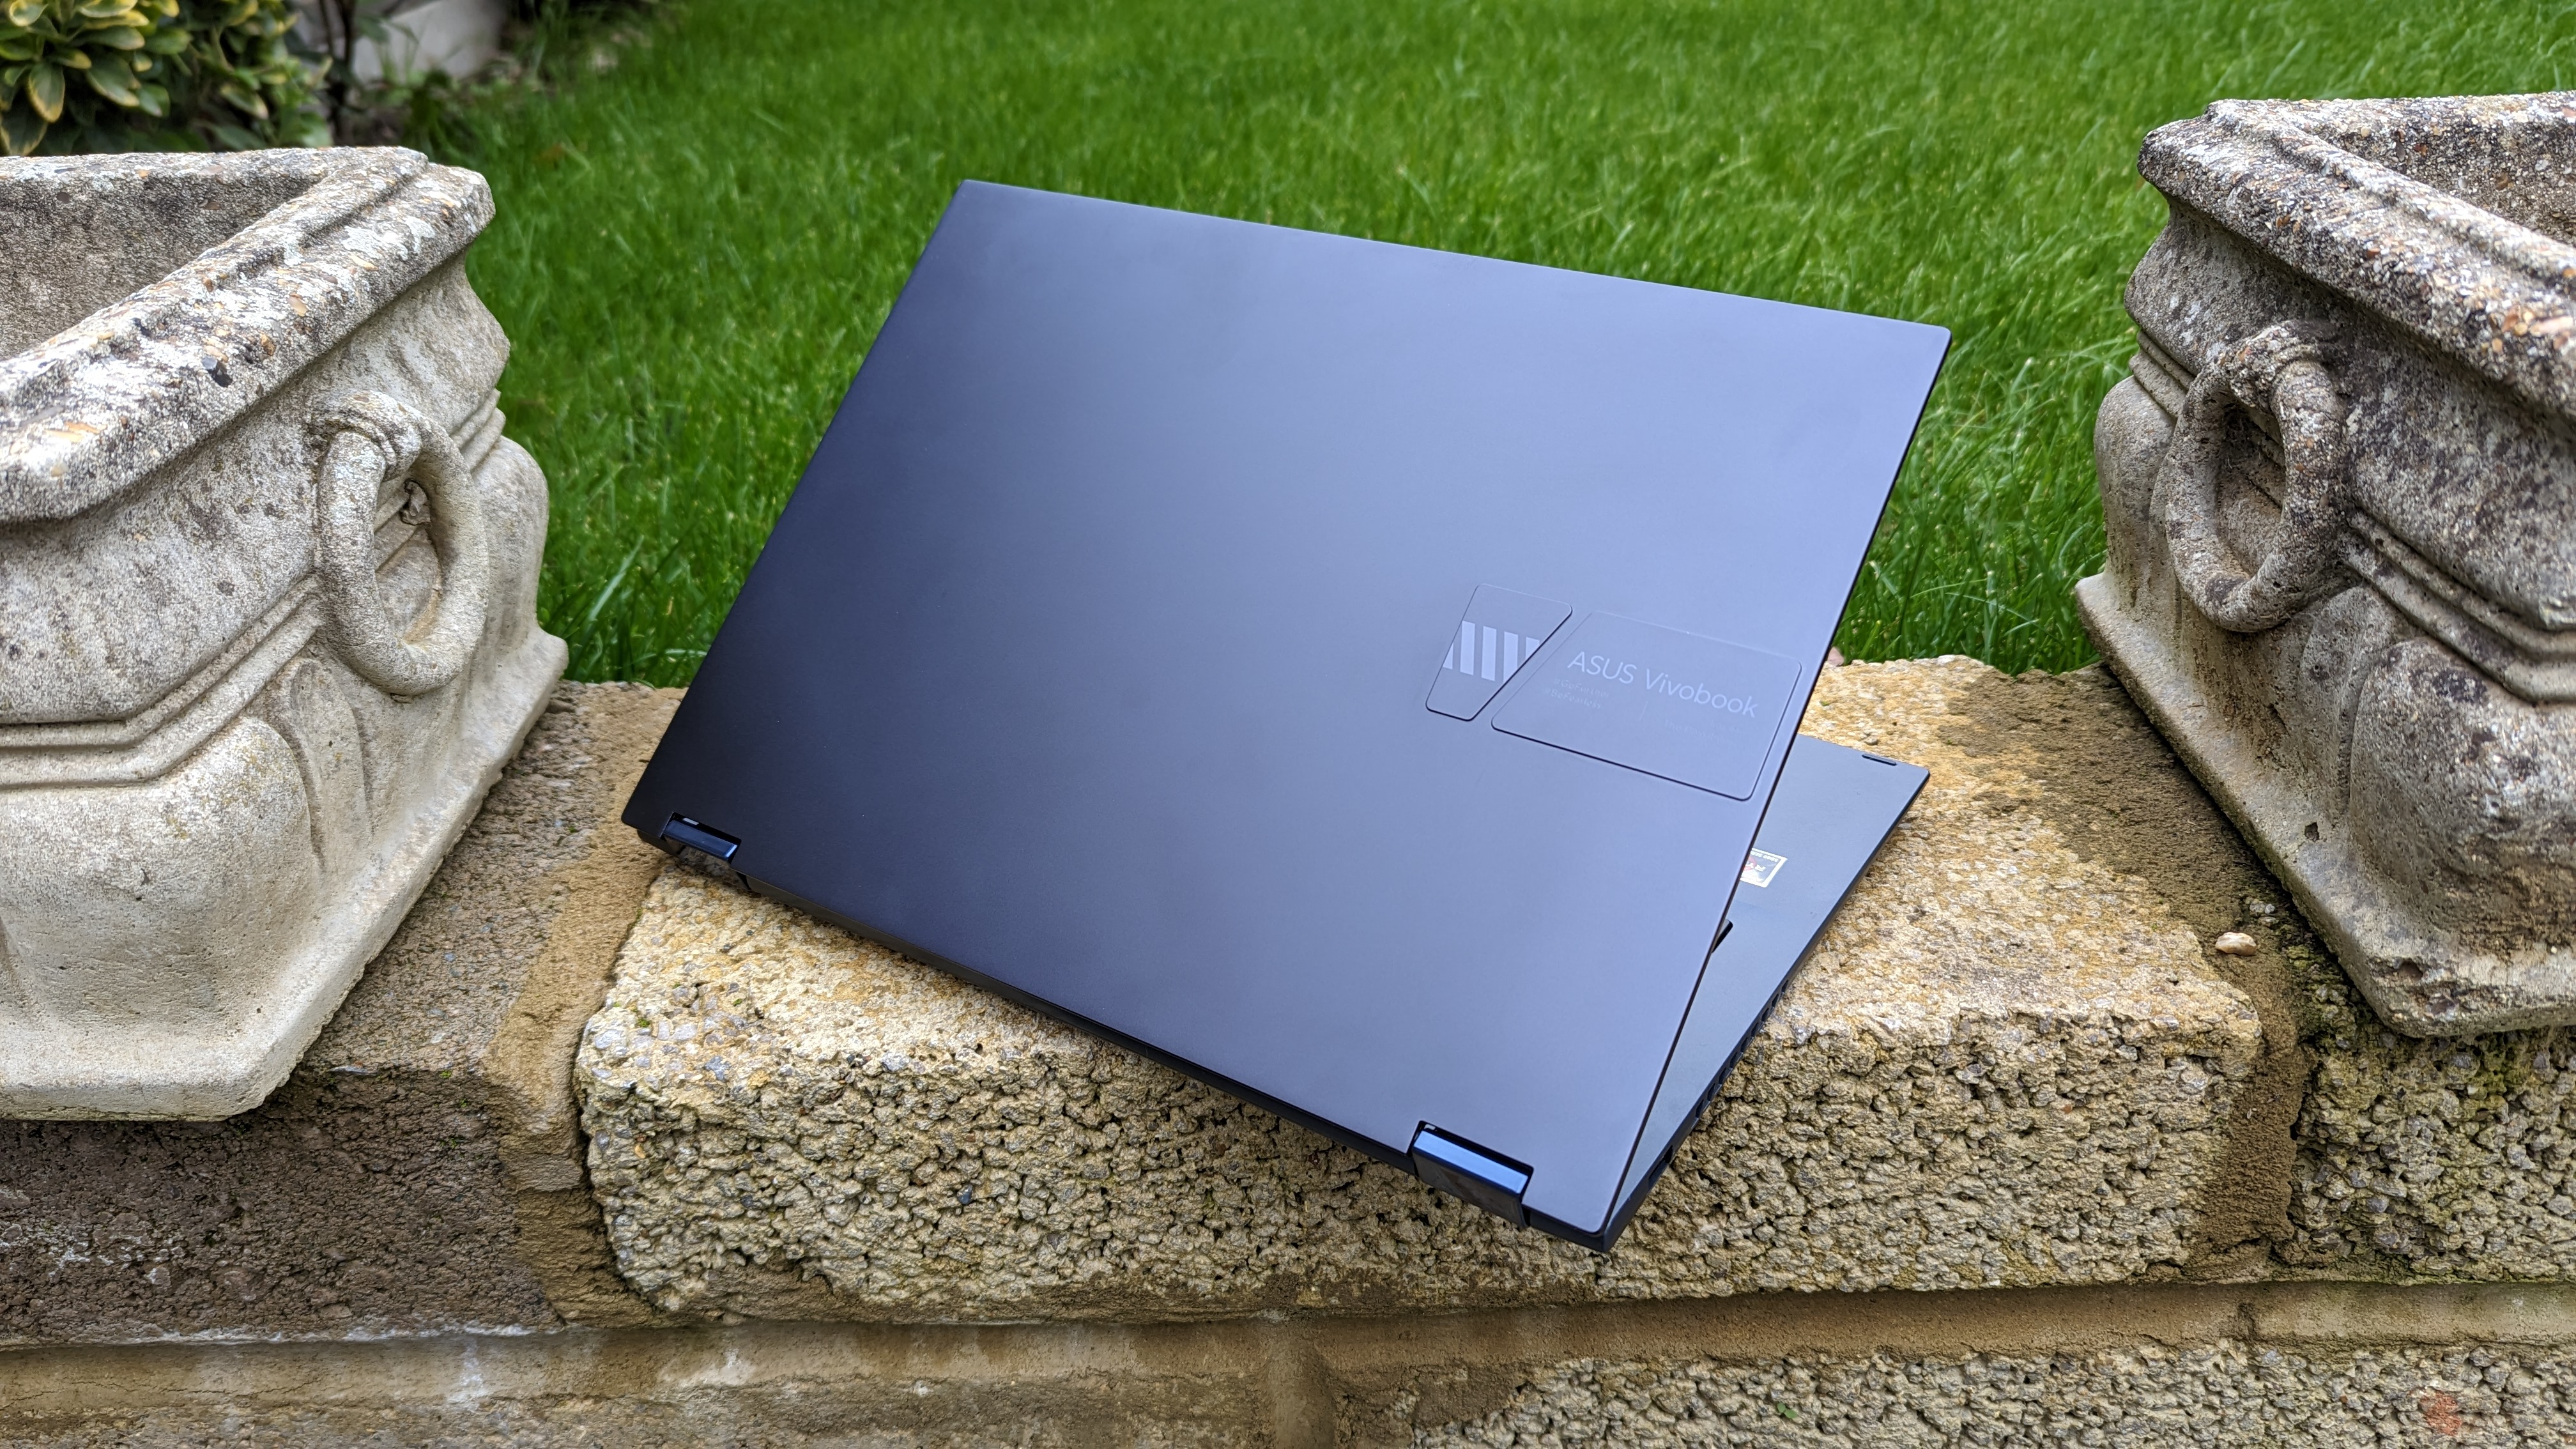 Asus Vivobook S 14 Flip OLED review: Incredible value | Laptop Mag